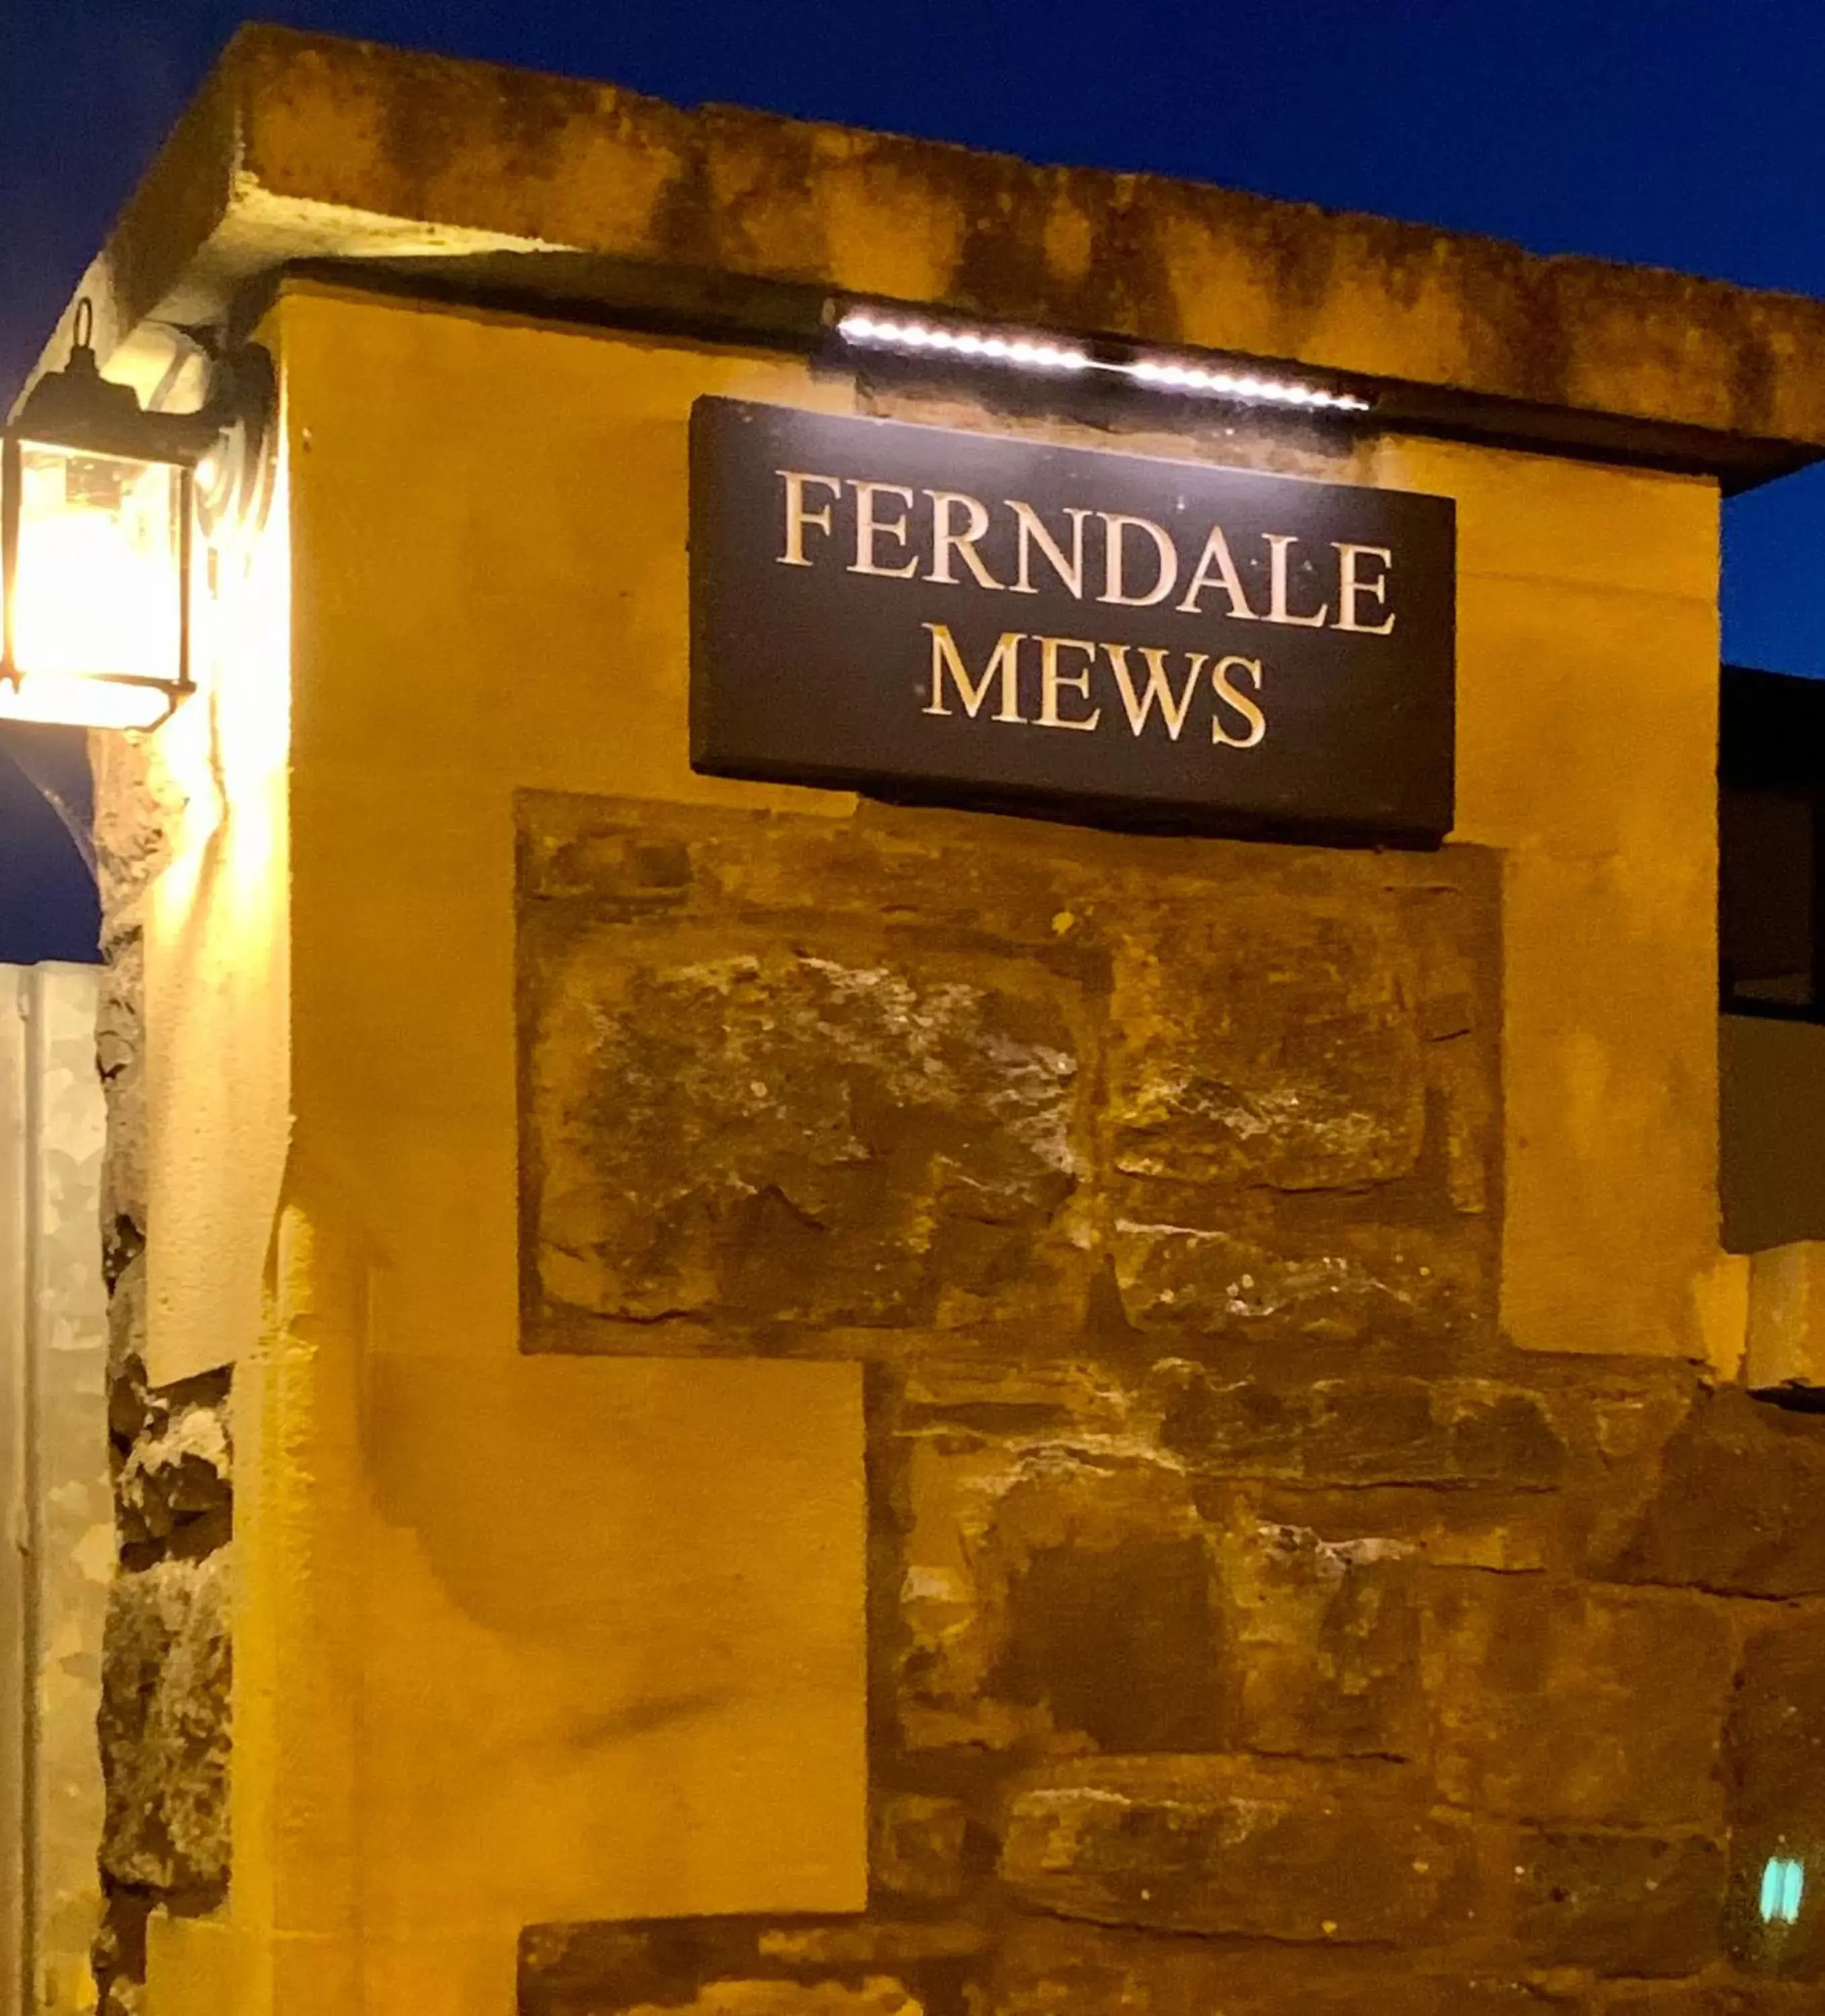 Property building in Ferndale Mews